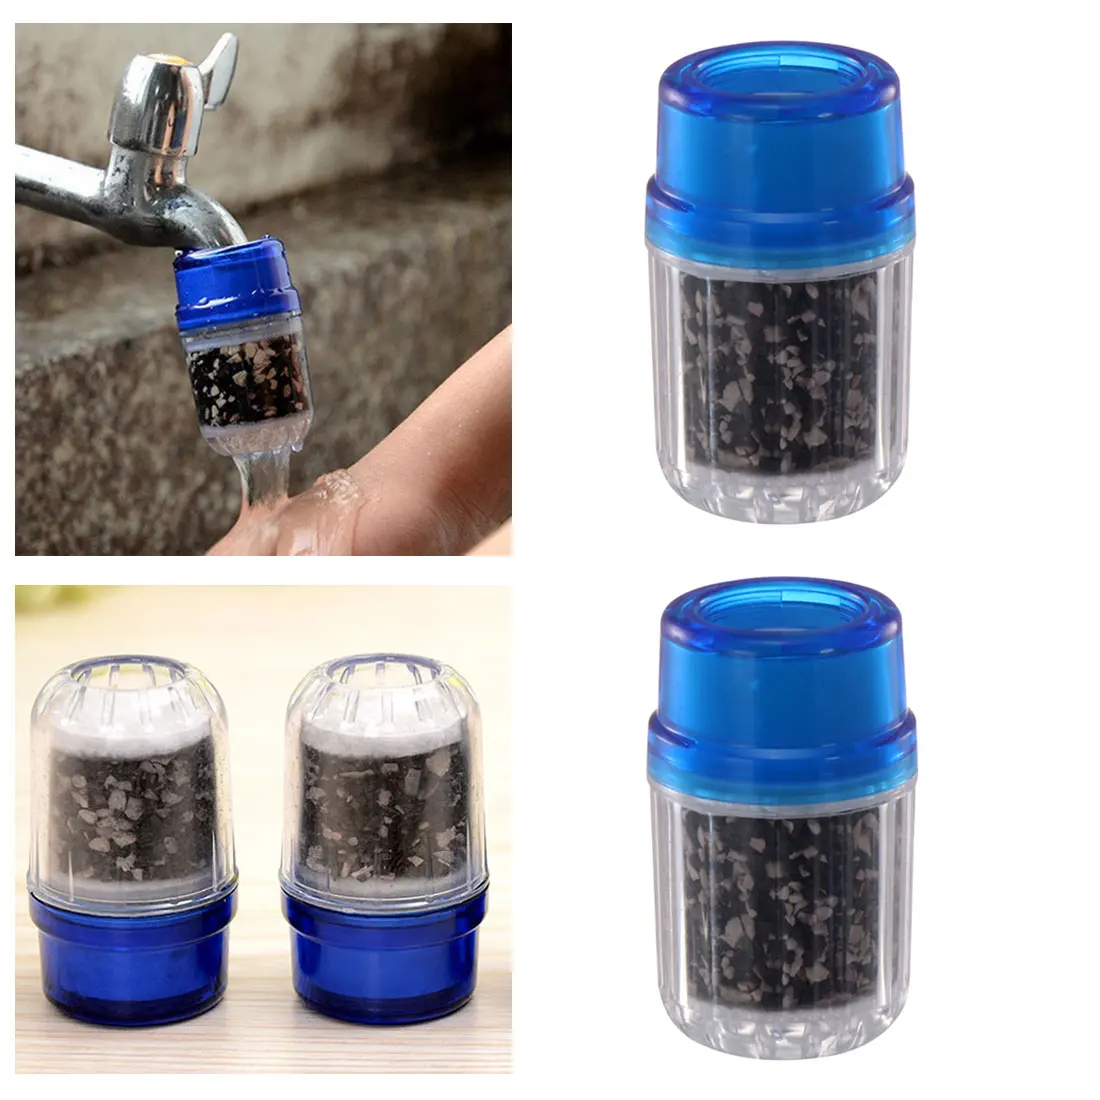 Home Kitchen Activated Carbon Water Filter Household Faucet Tap Water Purifier Remove Rust Sediment Filtering Suspended